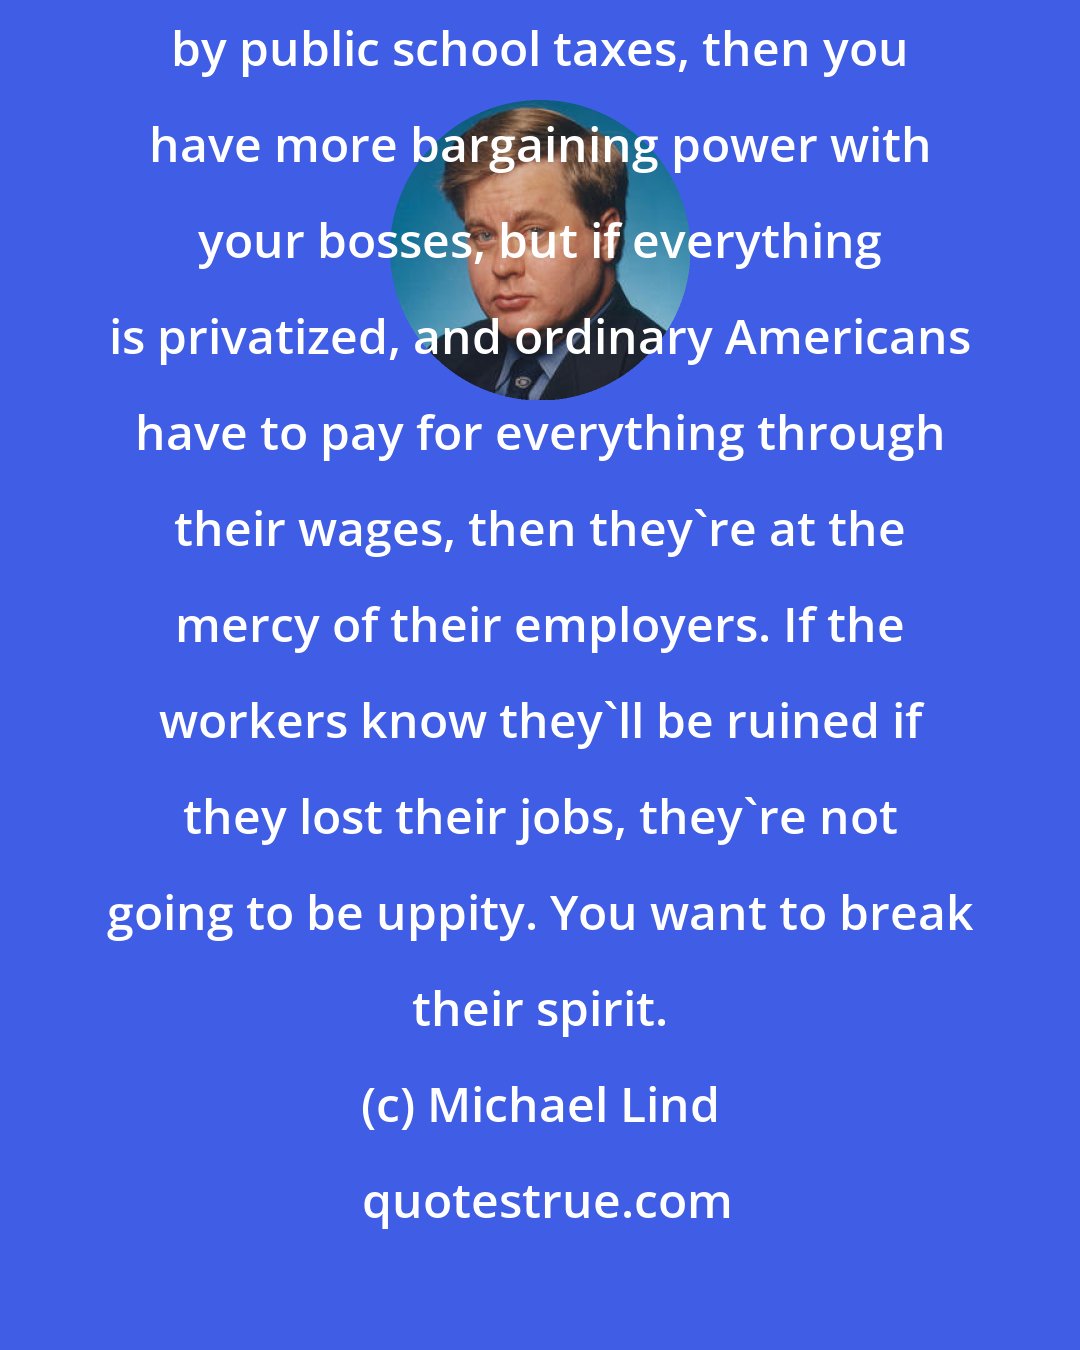 Michael Lind: If you have free universal health care and free education supported by public school taxes, then you have more bargaining power with your bosses, but if everything is privatized, and ordinary Americans have to pay for everything through their wages, then they're at the mercy of their employers. If the workers know they'll be ruined if they lost their jobs, they're not going to be uppity. You want to break their spirit.